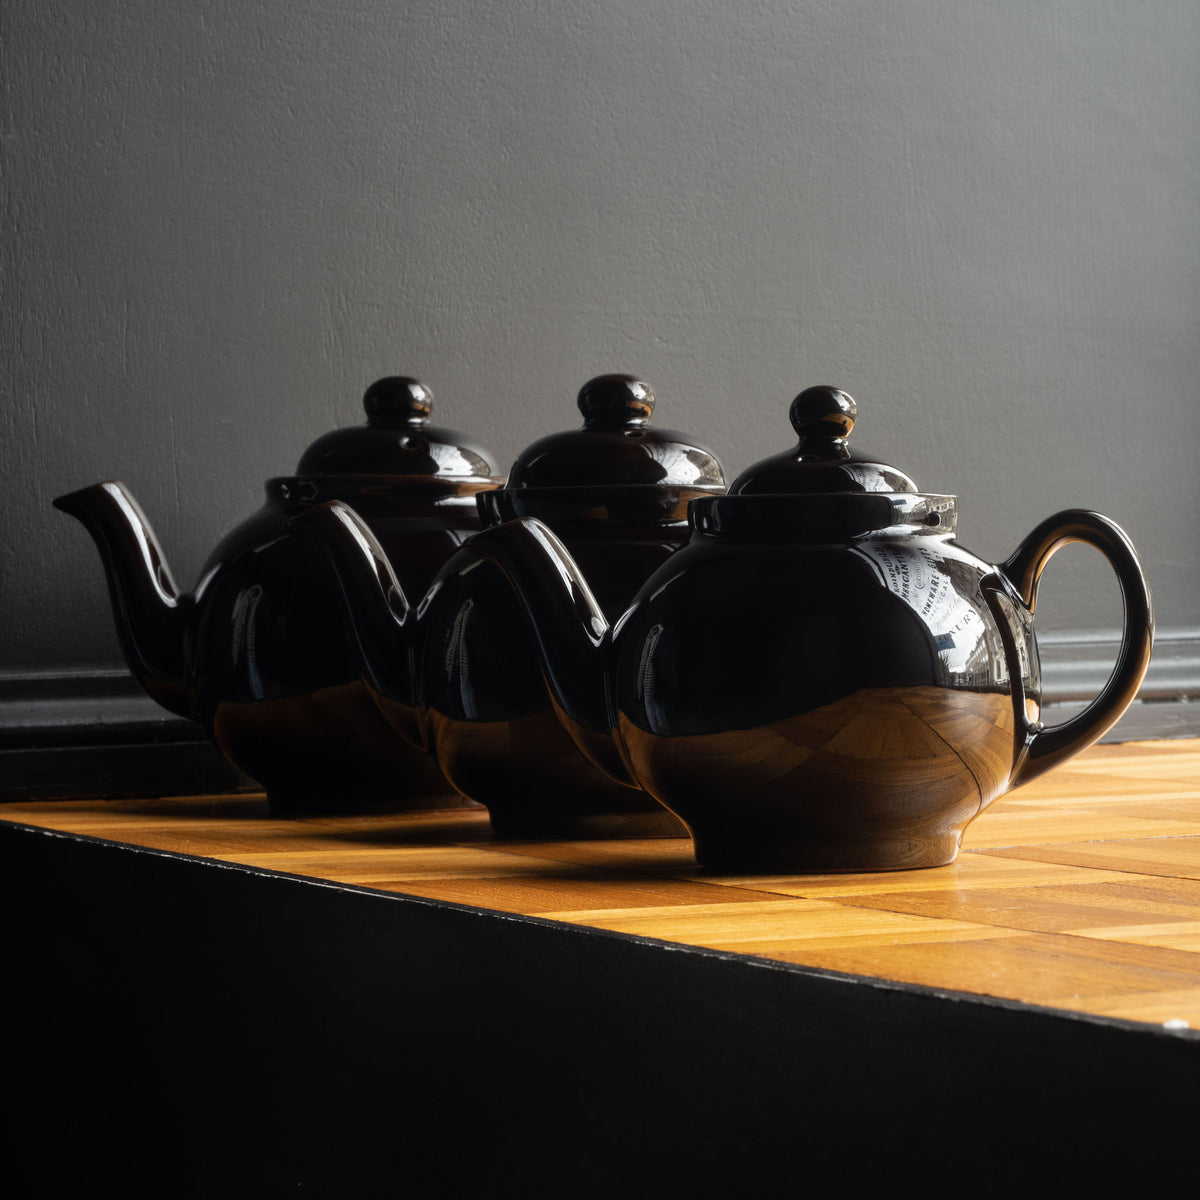 Brown Betty Teapots 2cup, 4 cup & 6 cup sizes